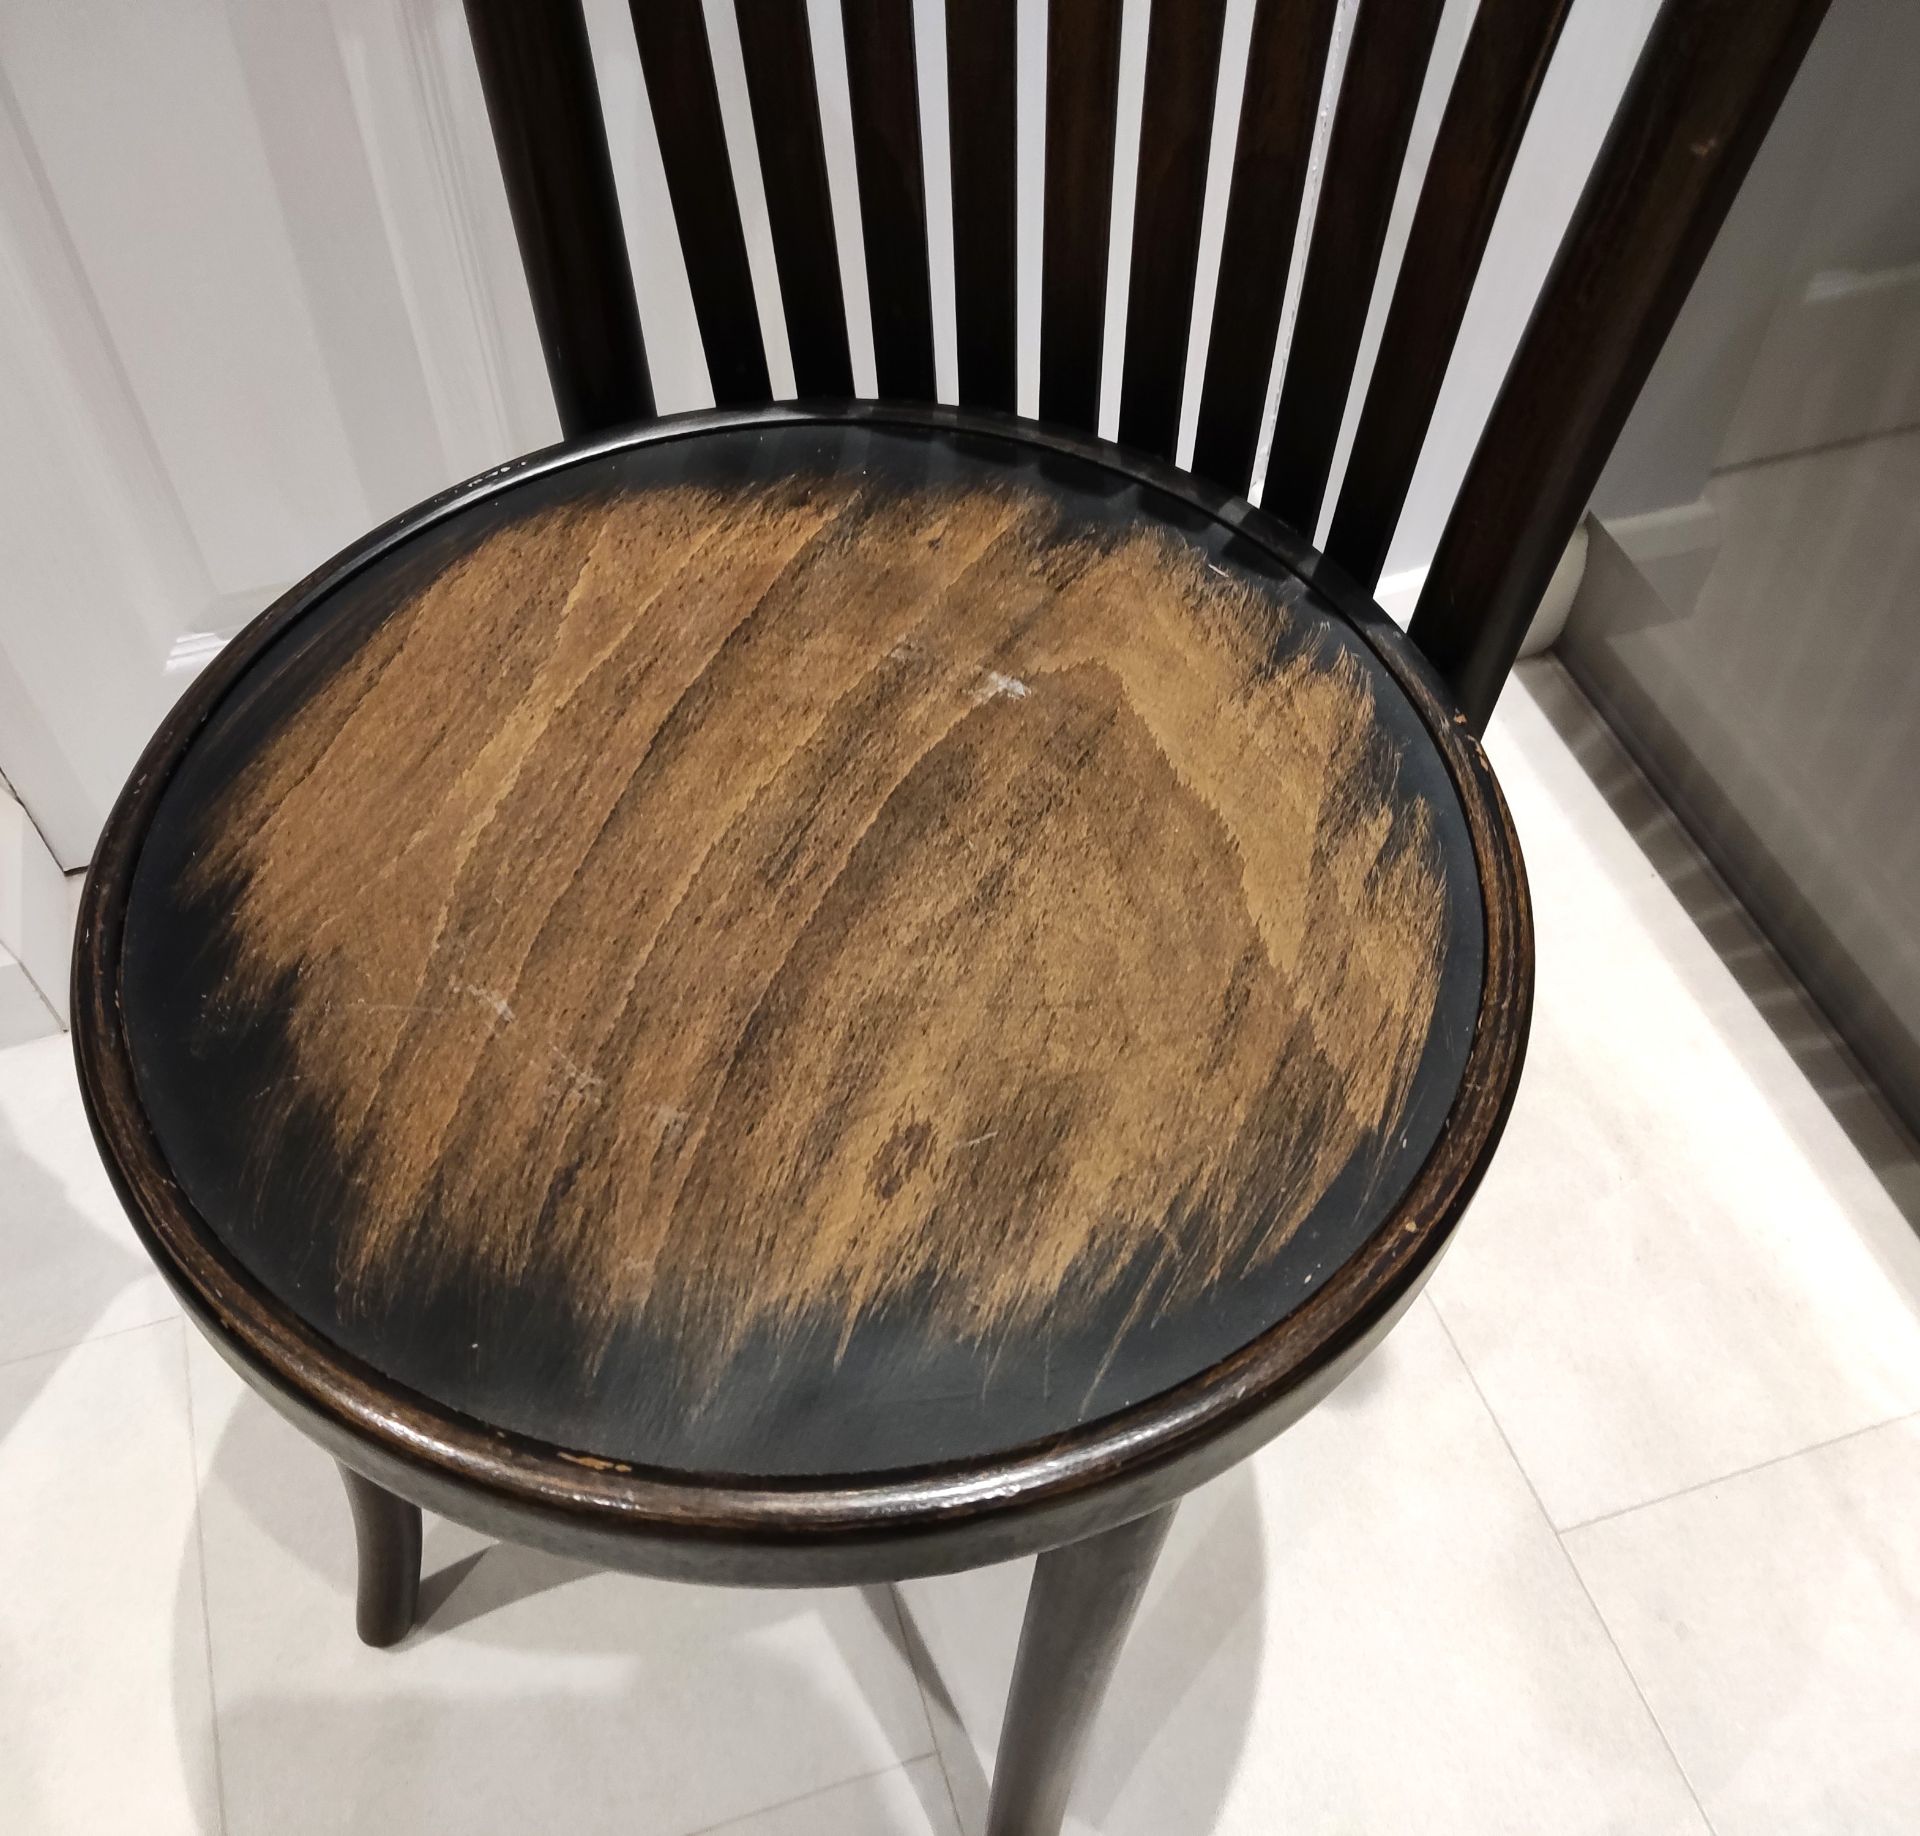 1 x Vintage Dark Wood Bentwood Chair - CL444 - NO VAT ON THE HAMMER - Location: Altrincham WA14 This - Image 14 of 15